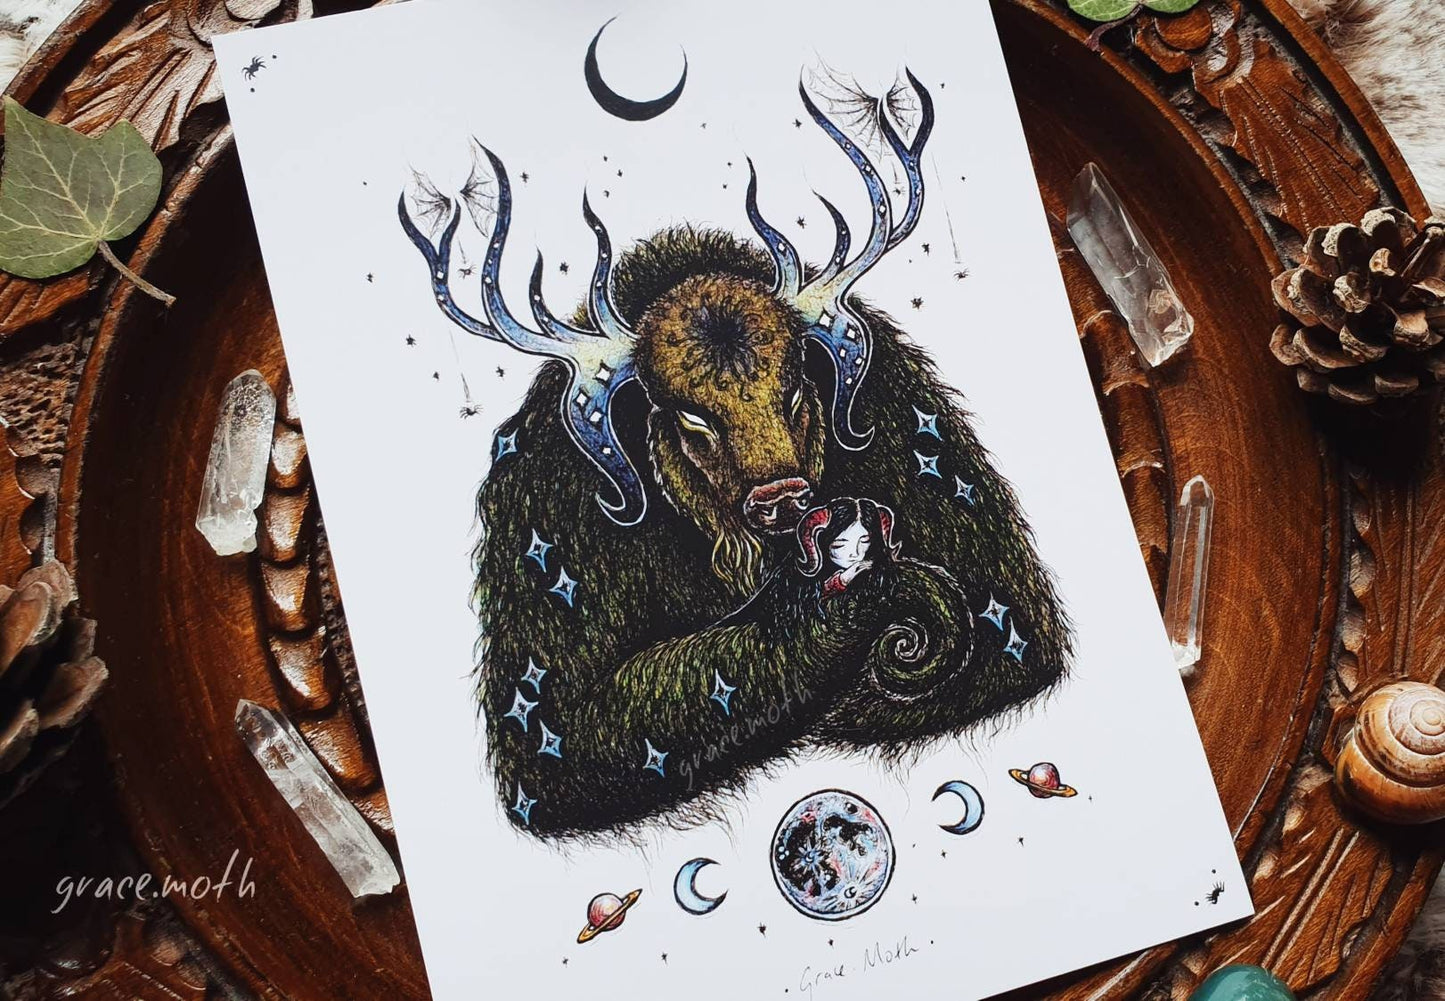 Held by the Cosmos - A6 print by Grace Moth - 5.8 x 4.1